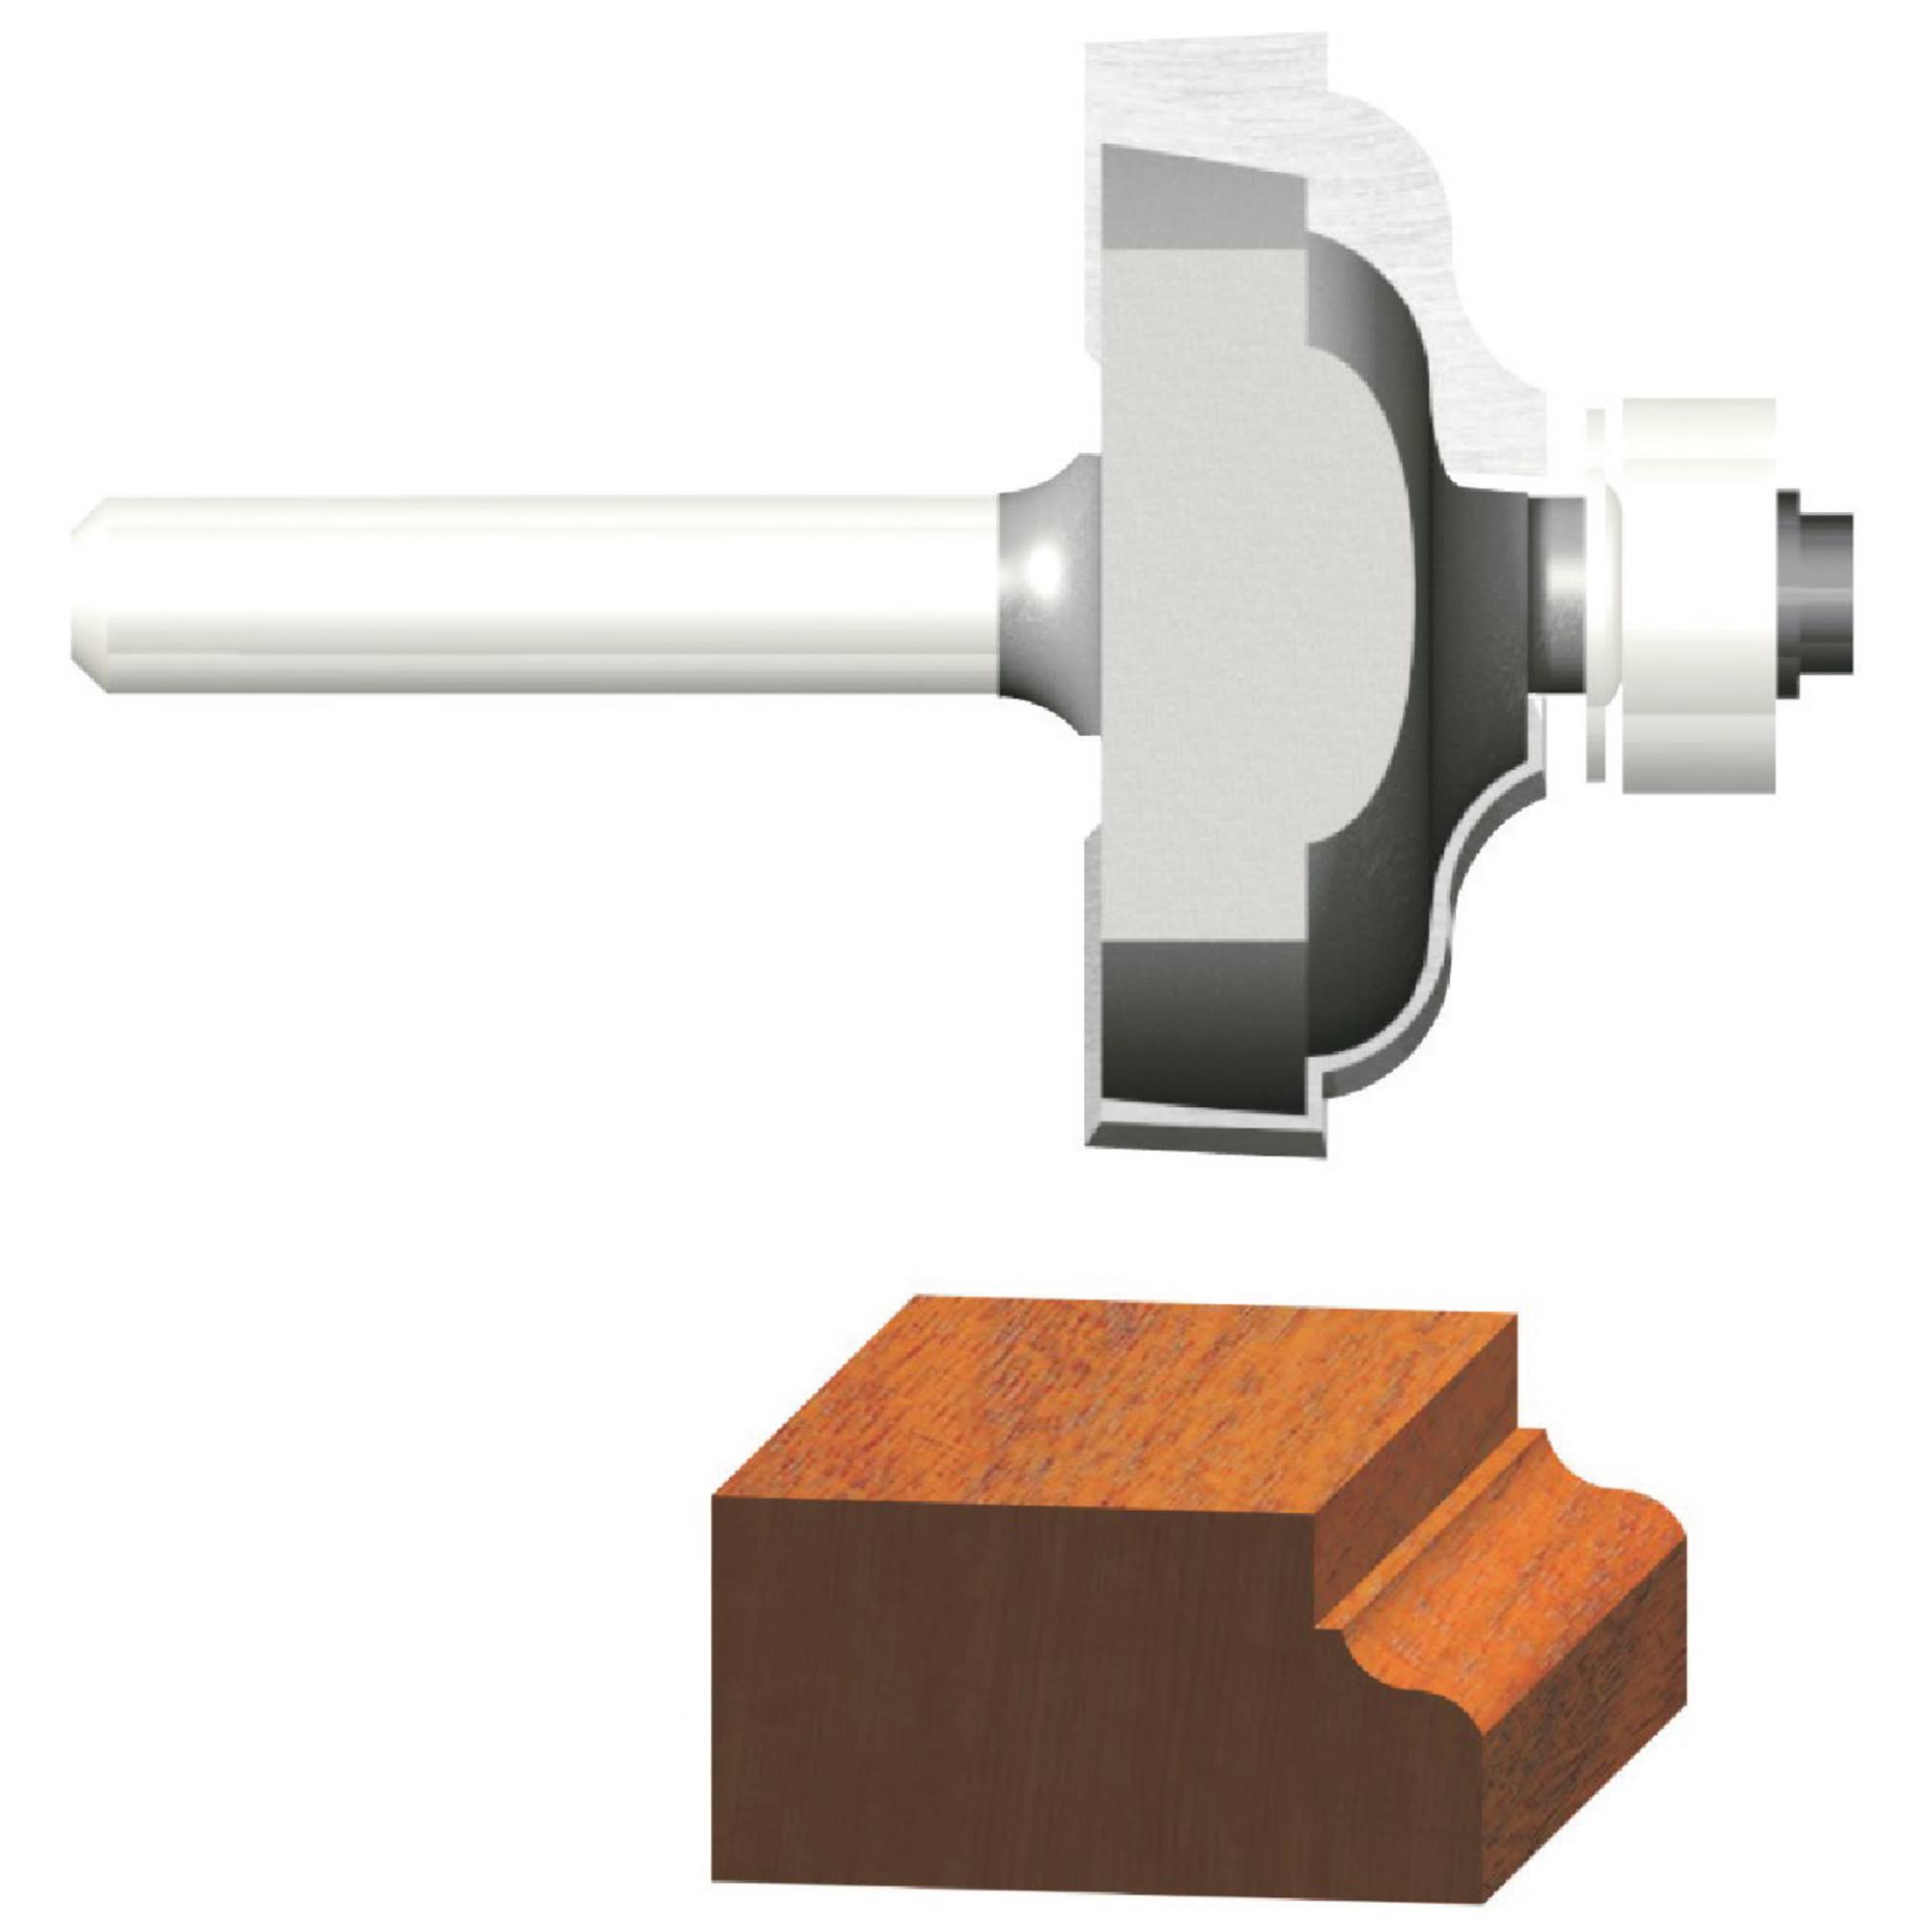 Vermont American Ogee With Fillet Router Bit